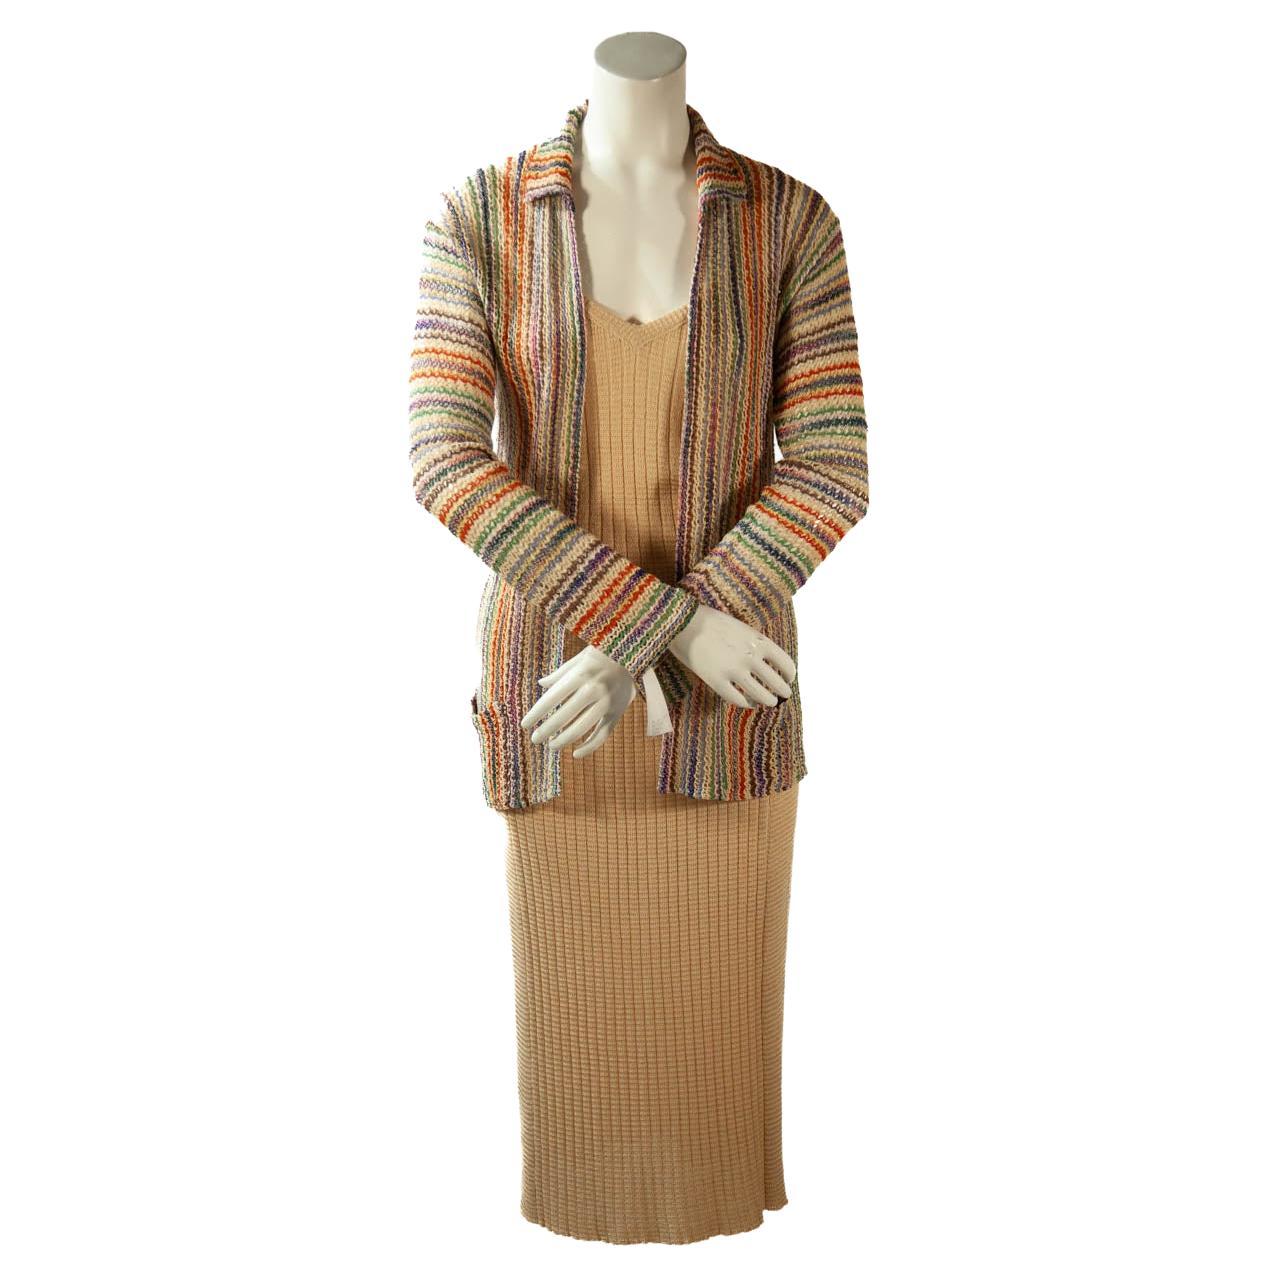 Missoni, Museum Documented Ensemble, Camisole, Skirt and Cardigan, 1973 For Sale